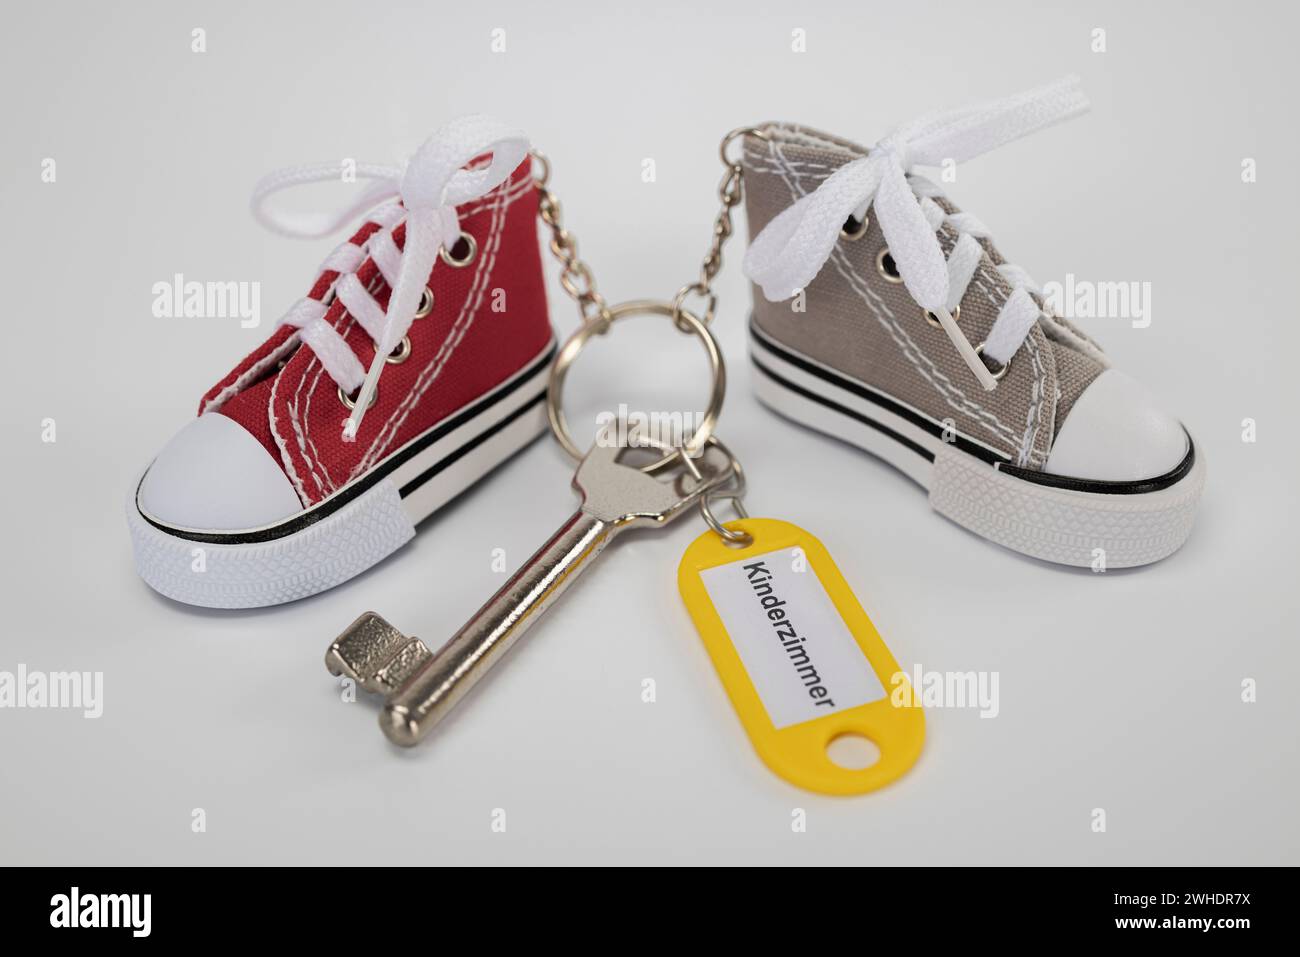 Room key with yellow keychain, labeled ëchildren's roomë, two sneakers keychain, miniature sneakers, colorful keychain, white background, Stock Photo